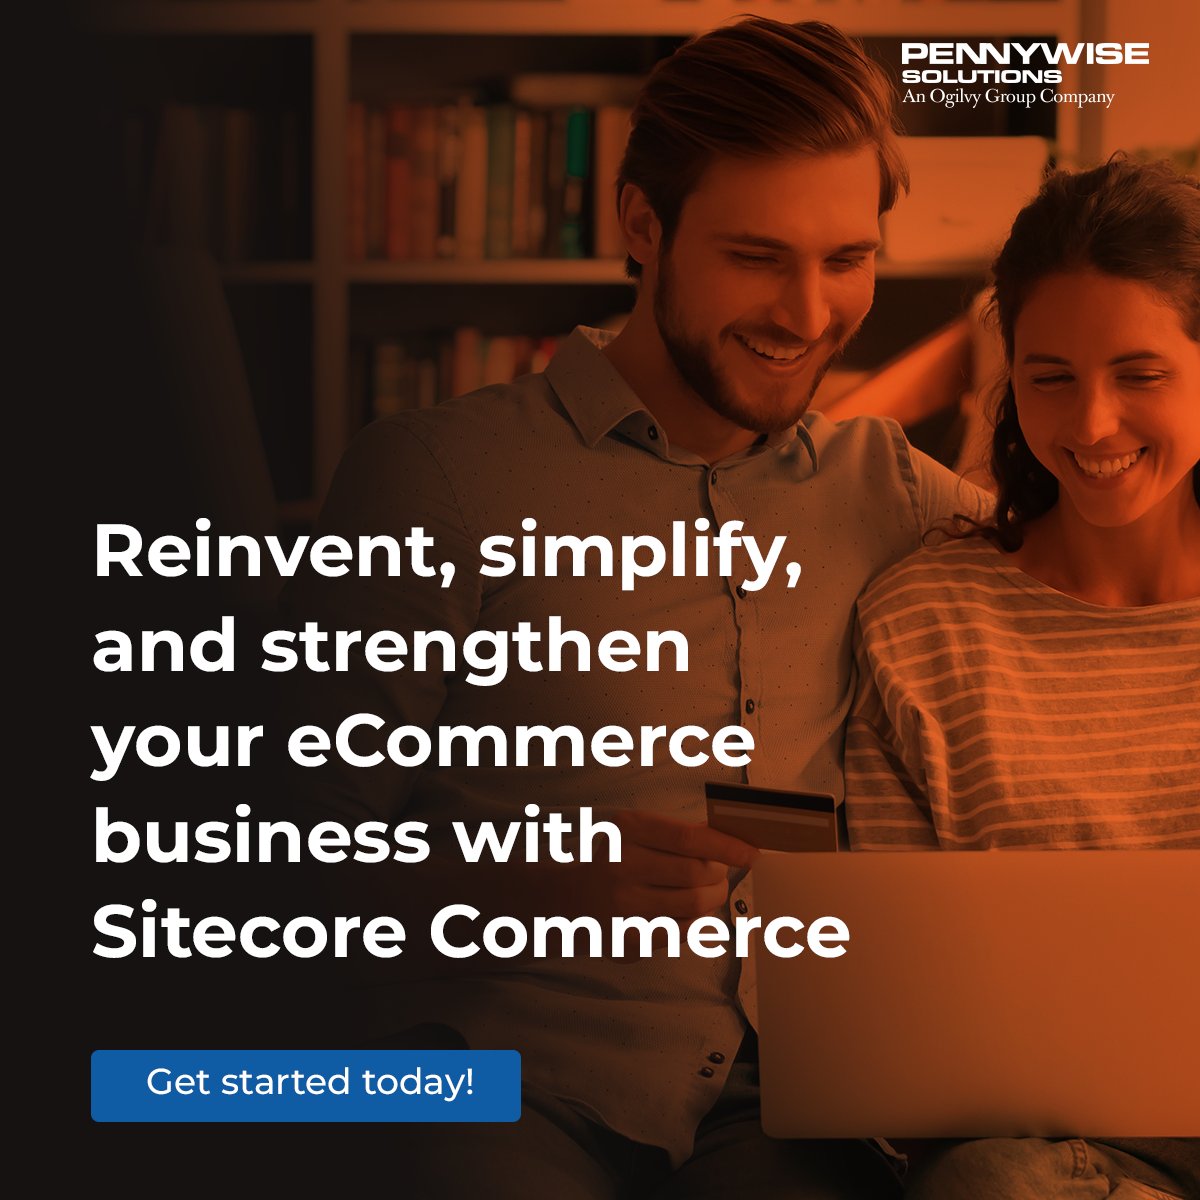 Want to make the most of #SitecoreCommerce for your brand? Consult our experts today! Visit bit.ly/3ypAFDP or mail us at info@pennywisesolutions.com #PennyWise #OgilvyGroup #DigitalTransformation #CustomerExperience #CX #Sitecore #eCommerce #OnlineShopping